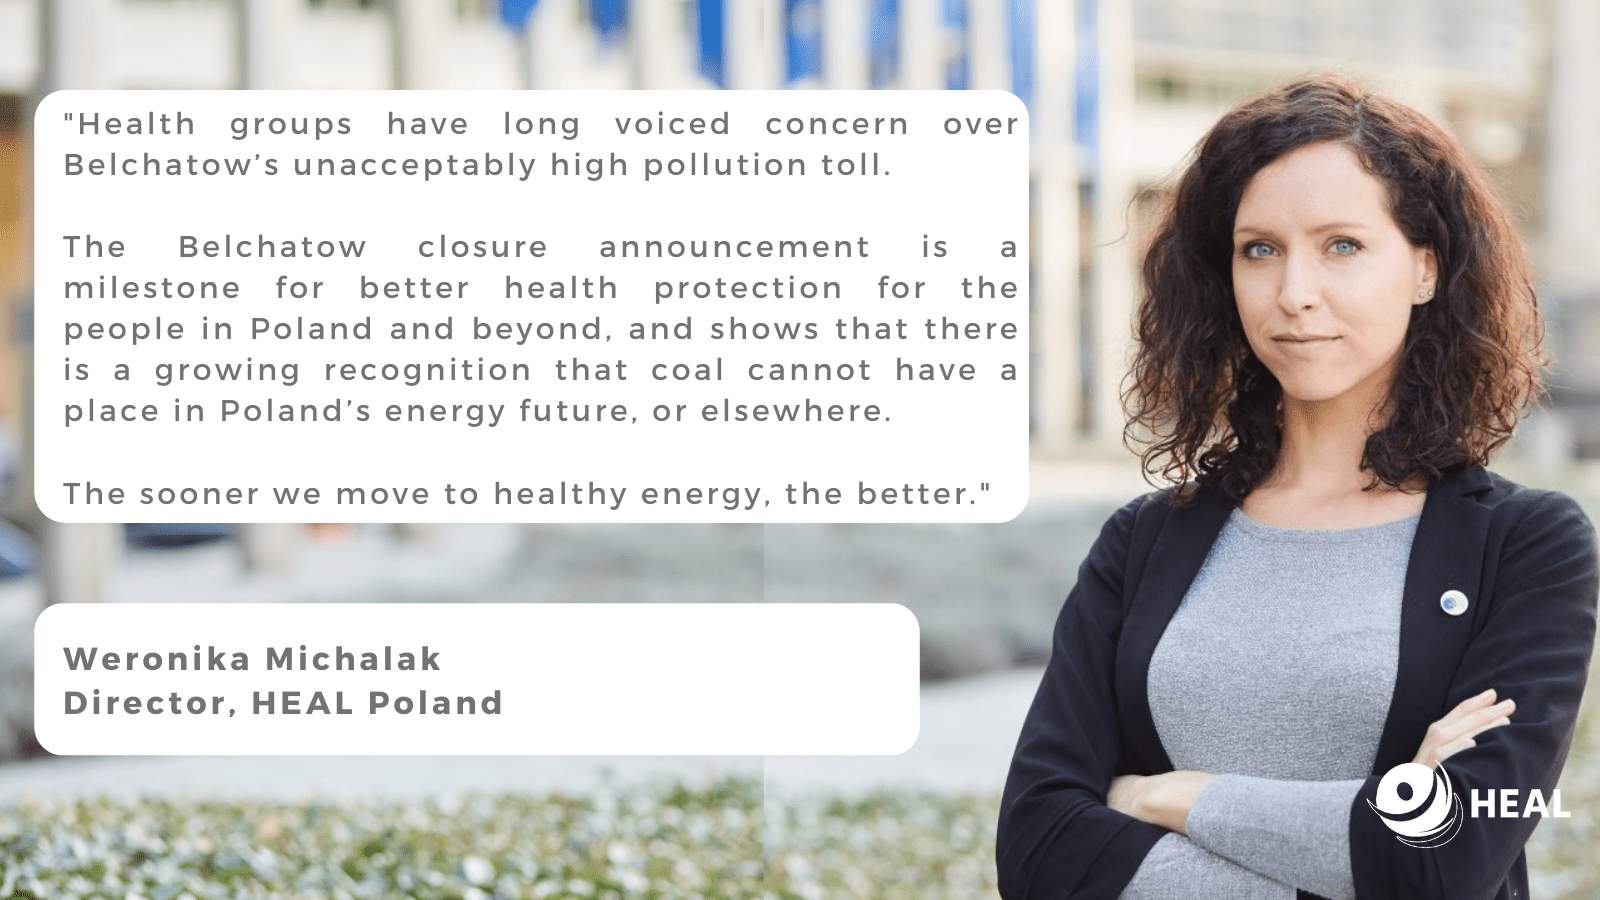 Announcement of Belchatow coal plant closure is turning point for health